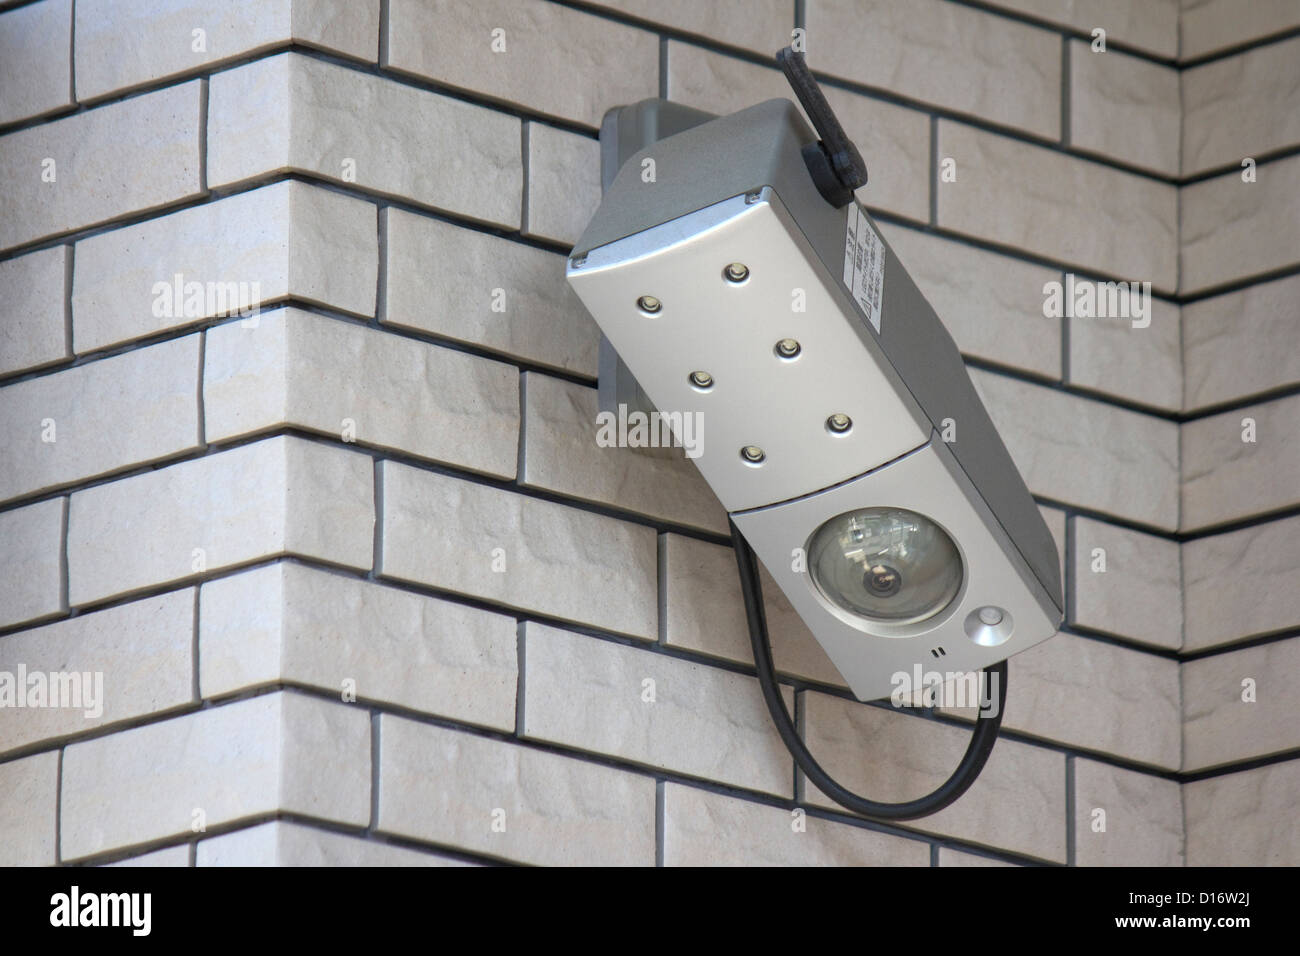 Security camera installed on wall Stock Photo